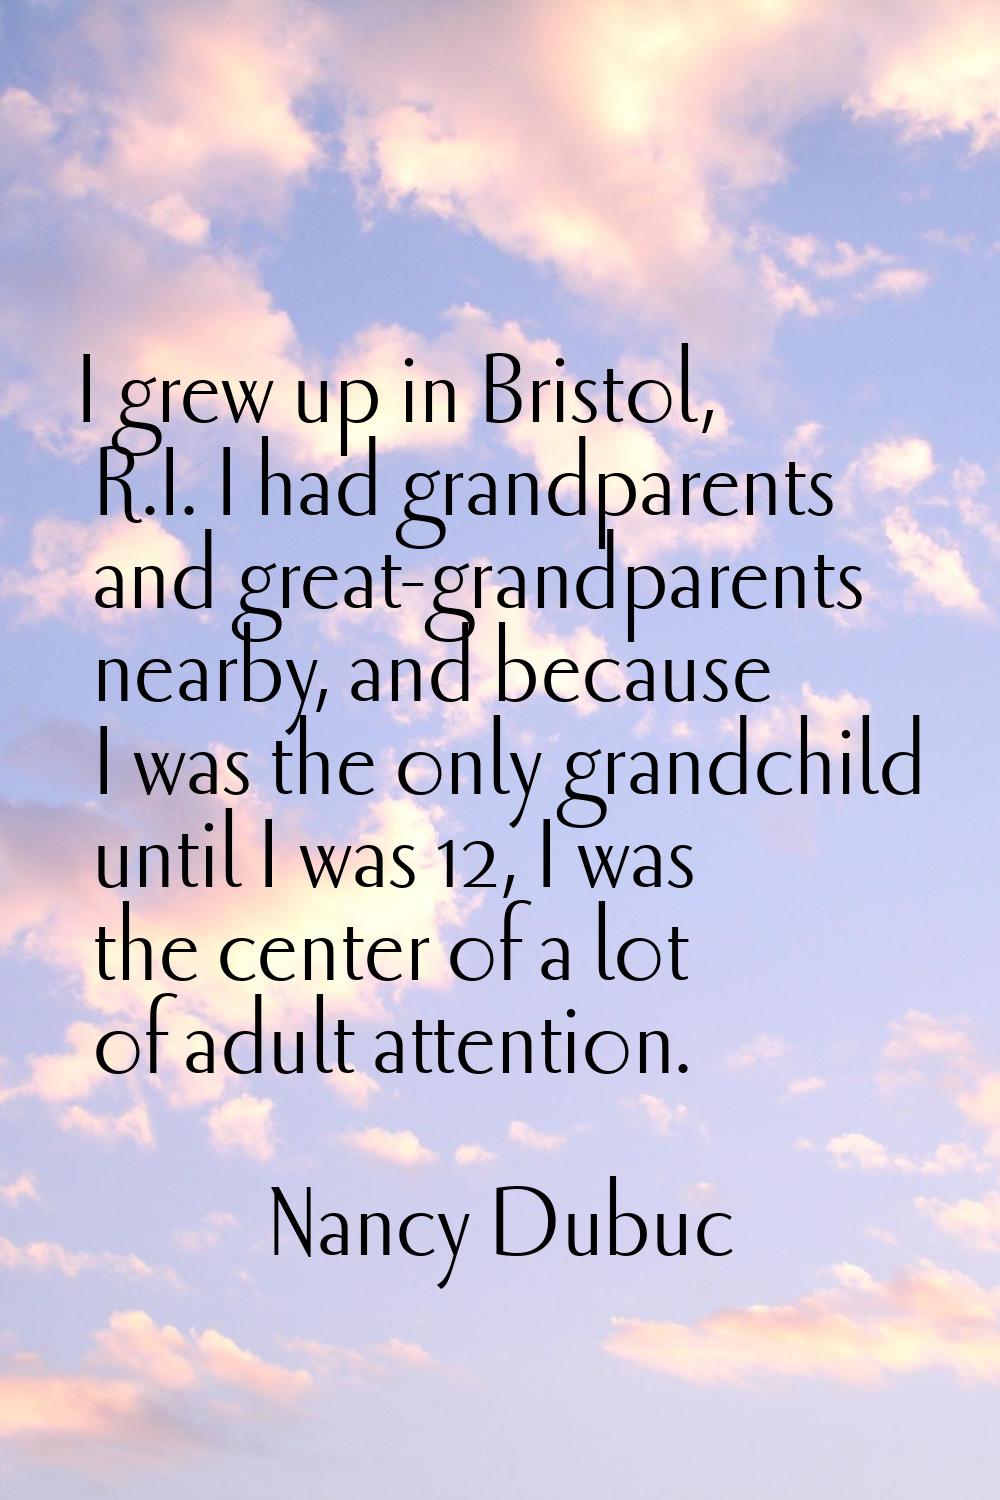 I grew up in Bristol, R.I. I had grandparents and great-grandparents nearby, and because I was the 